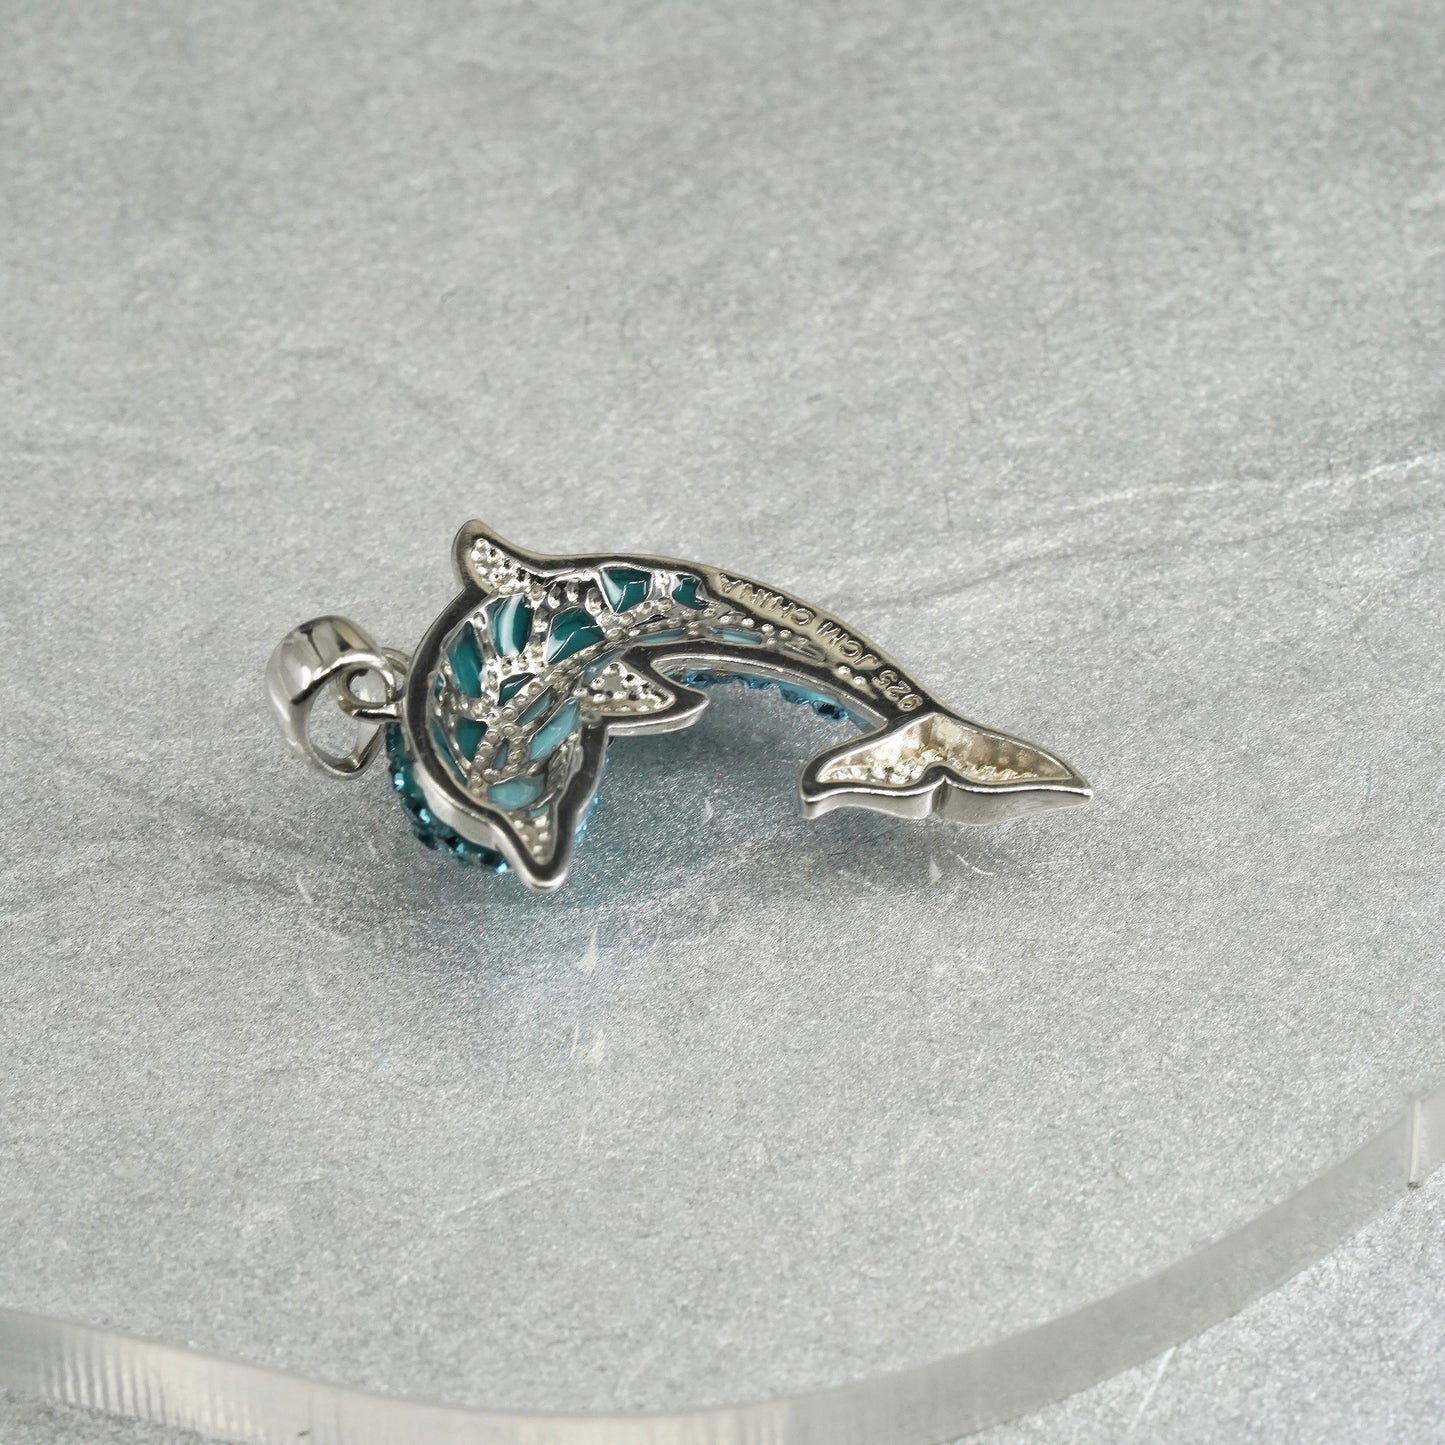 Vintage Sterling silver handmade 925 dolphin charm pendant with cluster cz